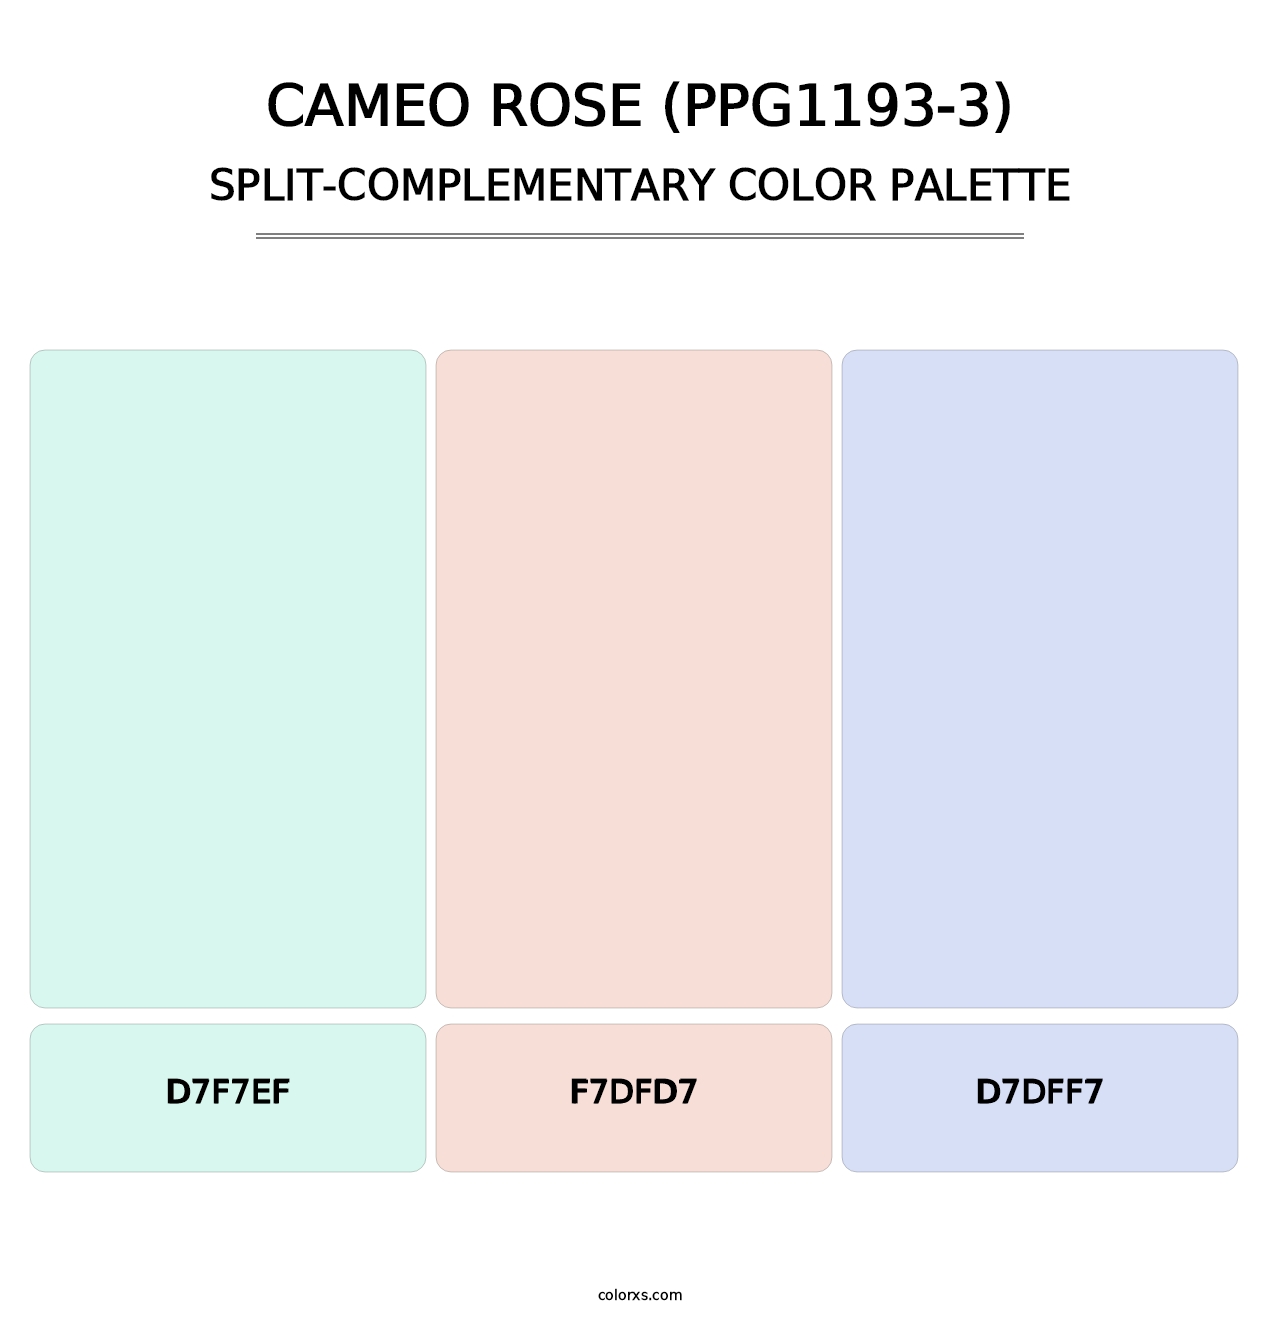 Cameo Rose (PPG1193-3) - Split-Complementary Color Palette